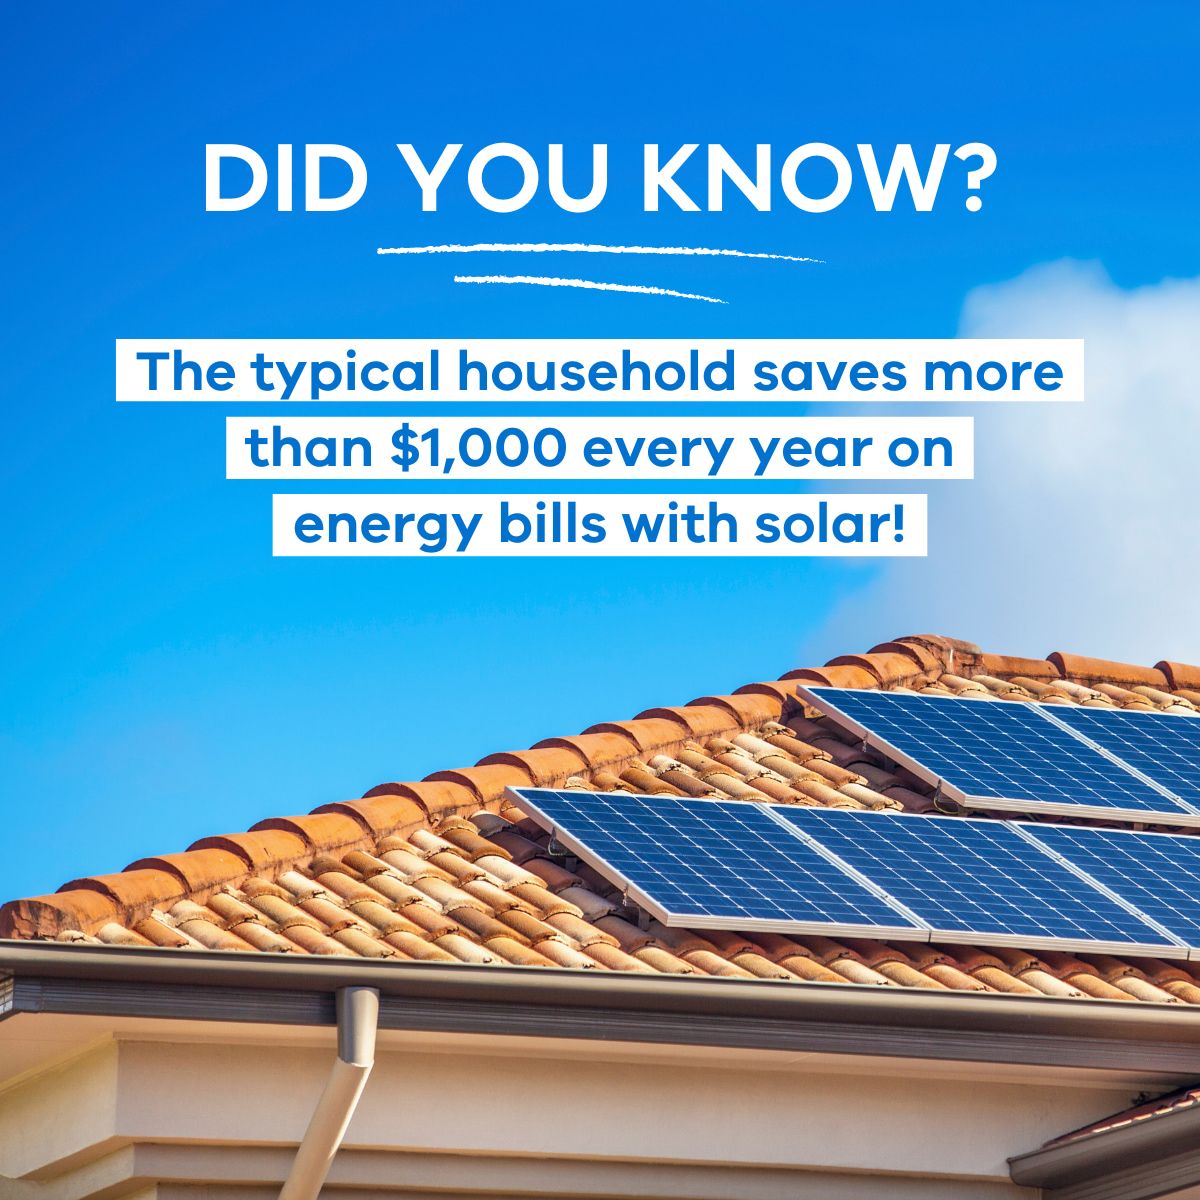 Solar panels on roof with text - did you know? The typical household saves more than $1,000 every year on energy bills with solar